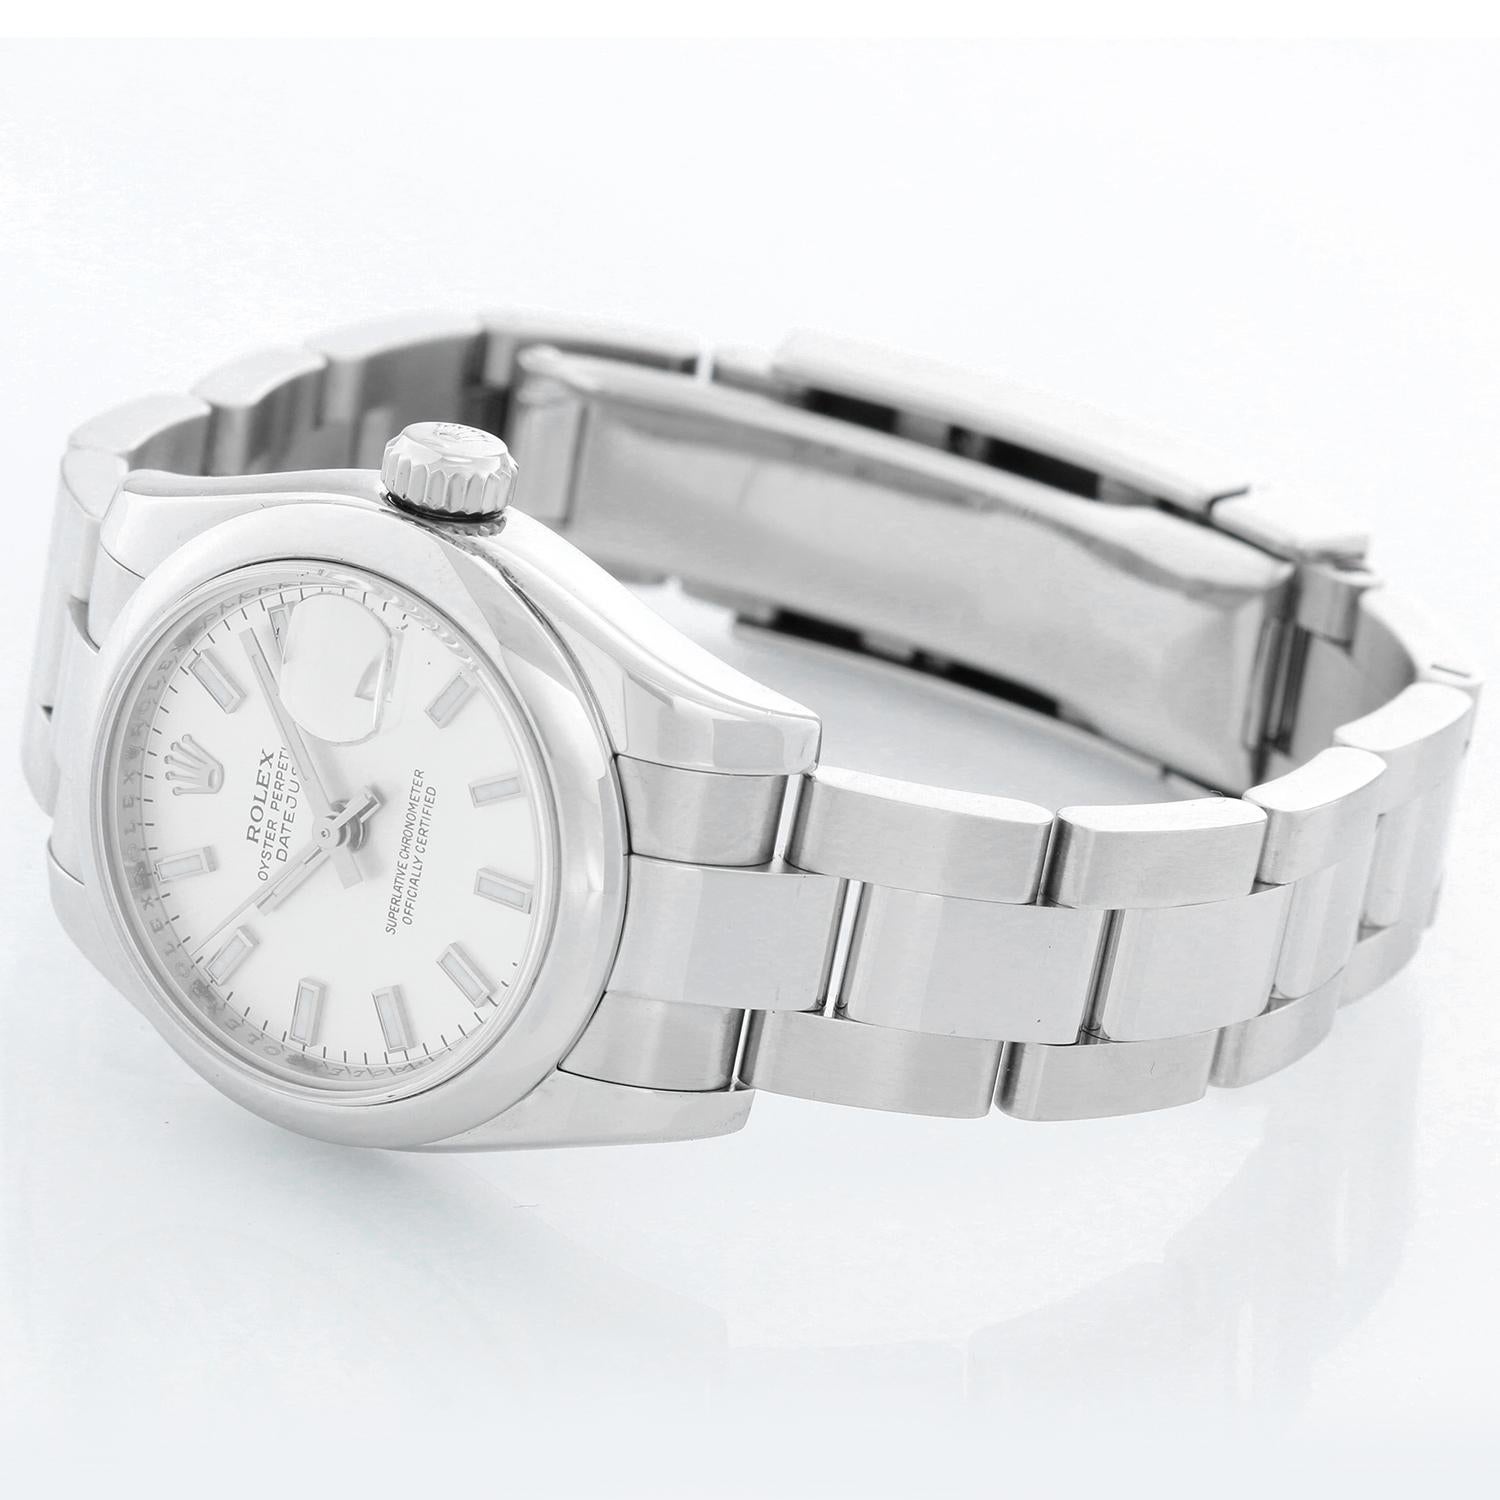 Rolex  Ladies Datejust Watch Steel with Silver Dial  179160 - Automatic winding; 31 jewel; sapphire crystal. Stainless steel case with smooth bezel (26mm diameter). Silver dial with stick hour markers. Stainless steel Oyster bracelet. Pre-owned with